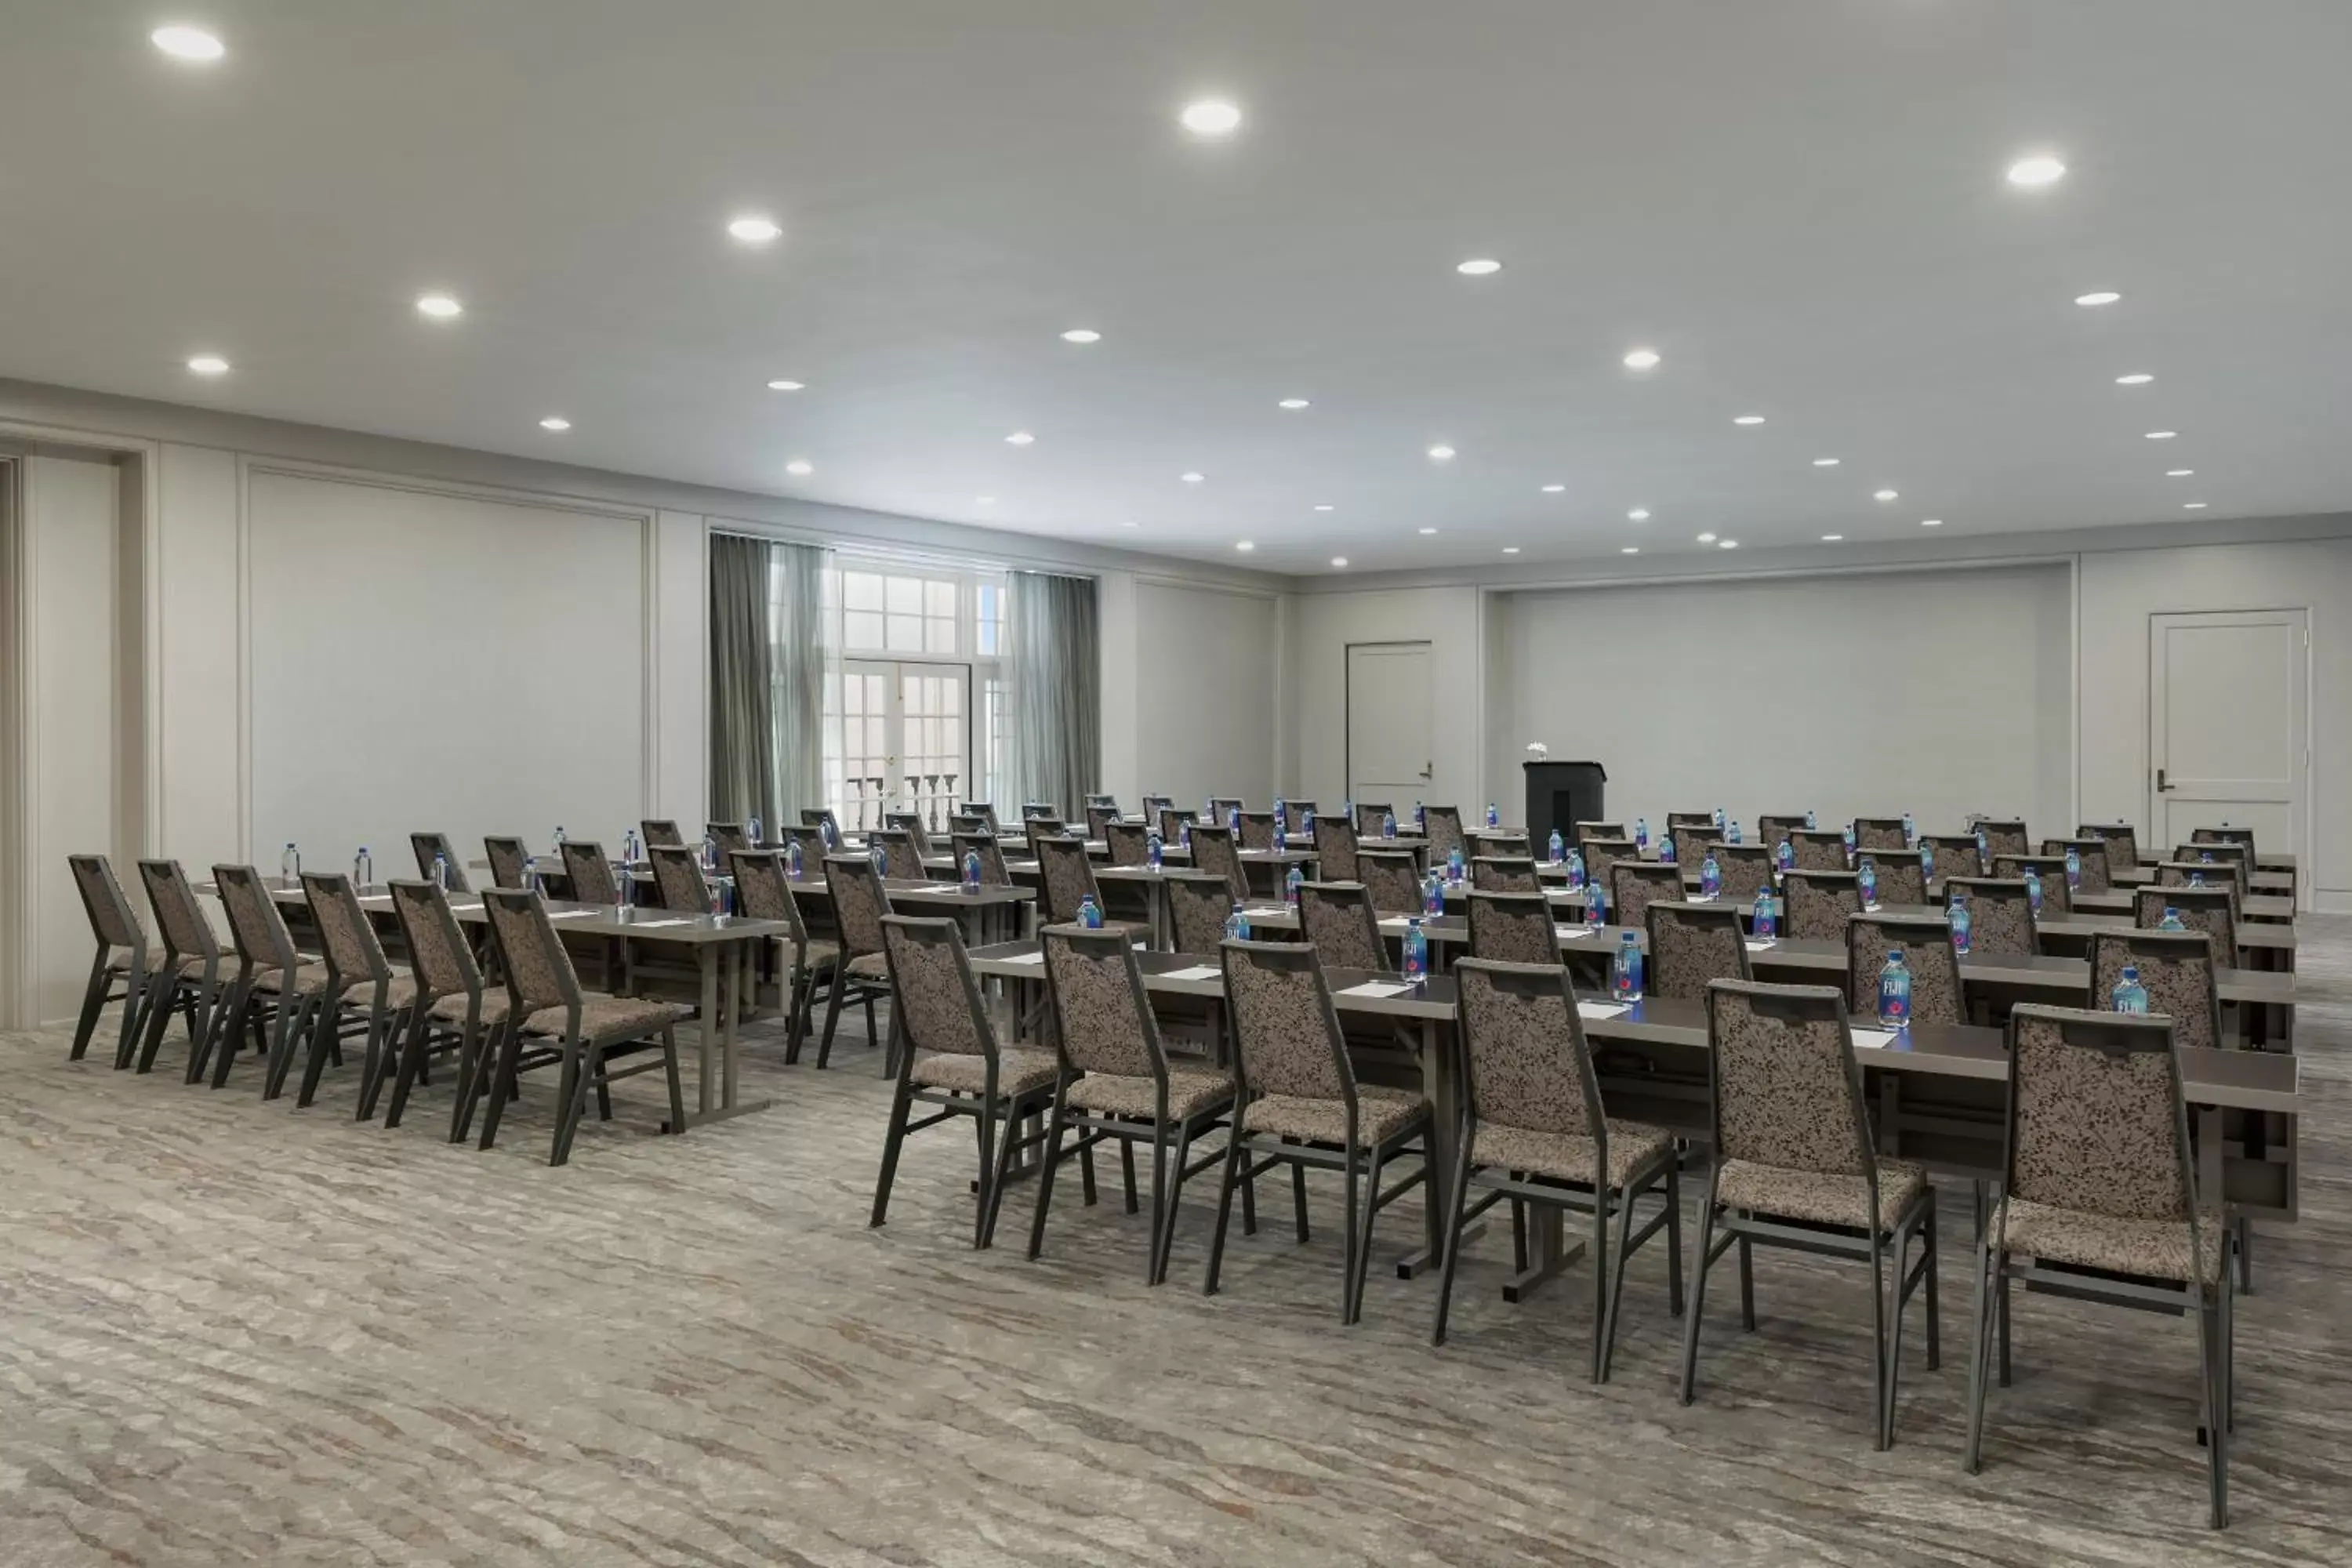 Meeting/conference room in The Westin New Orleans